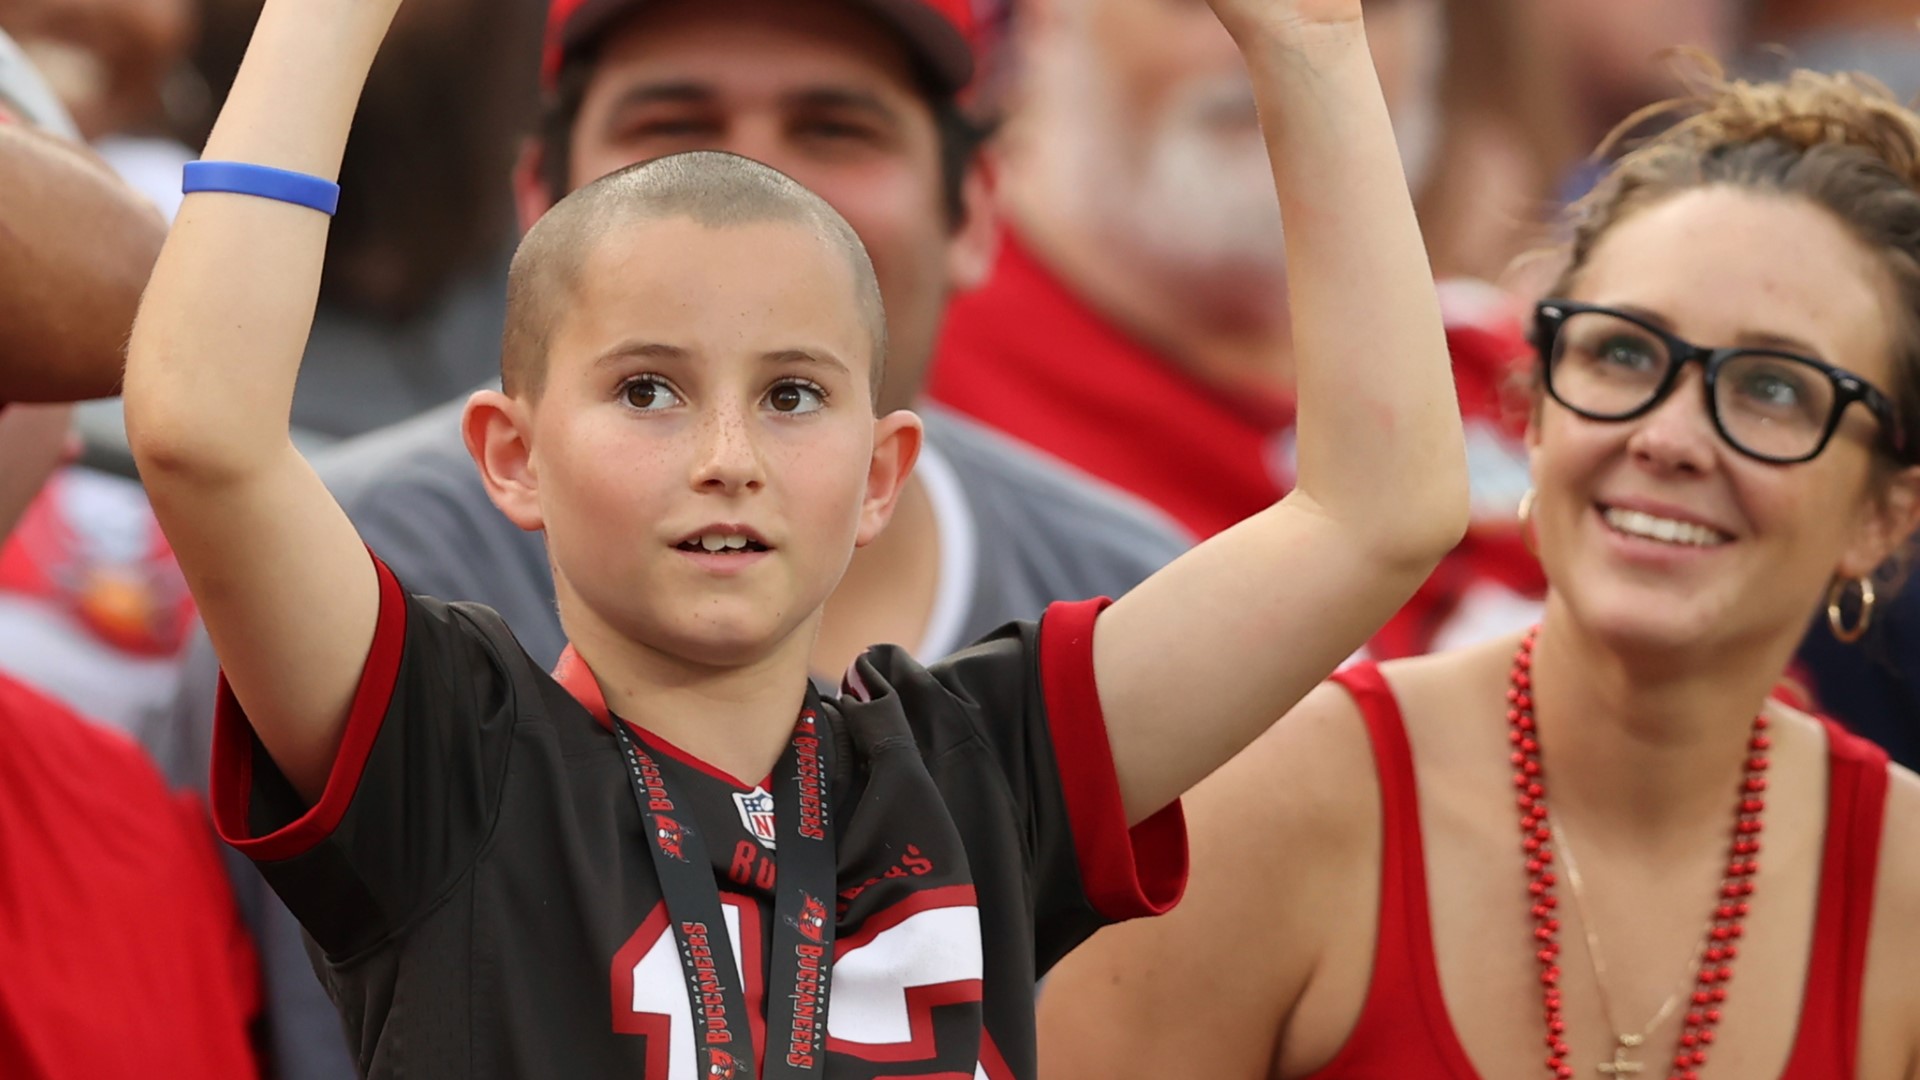 During Sunday's huge win over the Chicago Bears, a young Buccaneers fan stole the hearts of many with a sign in the stands.